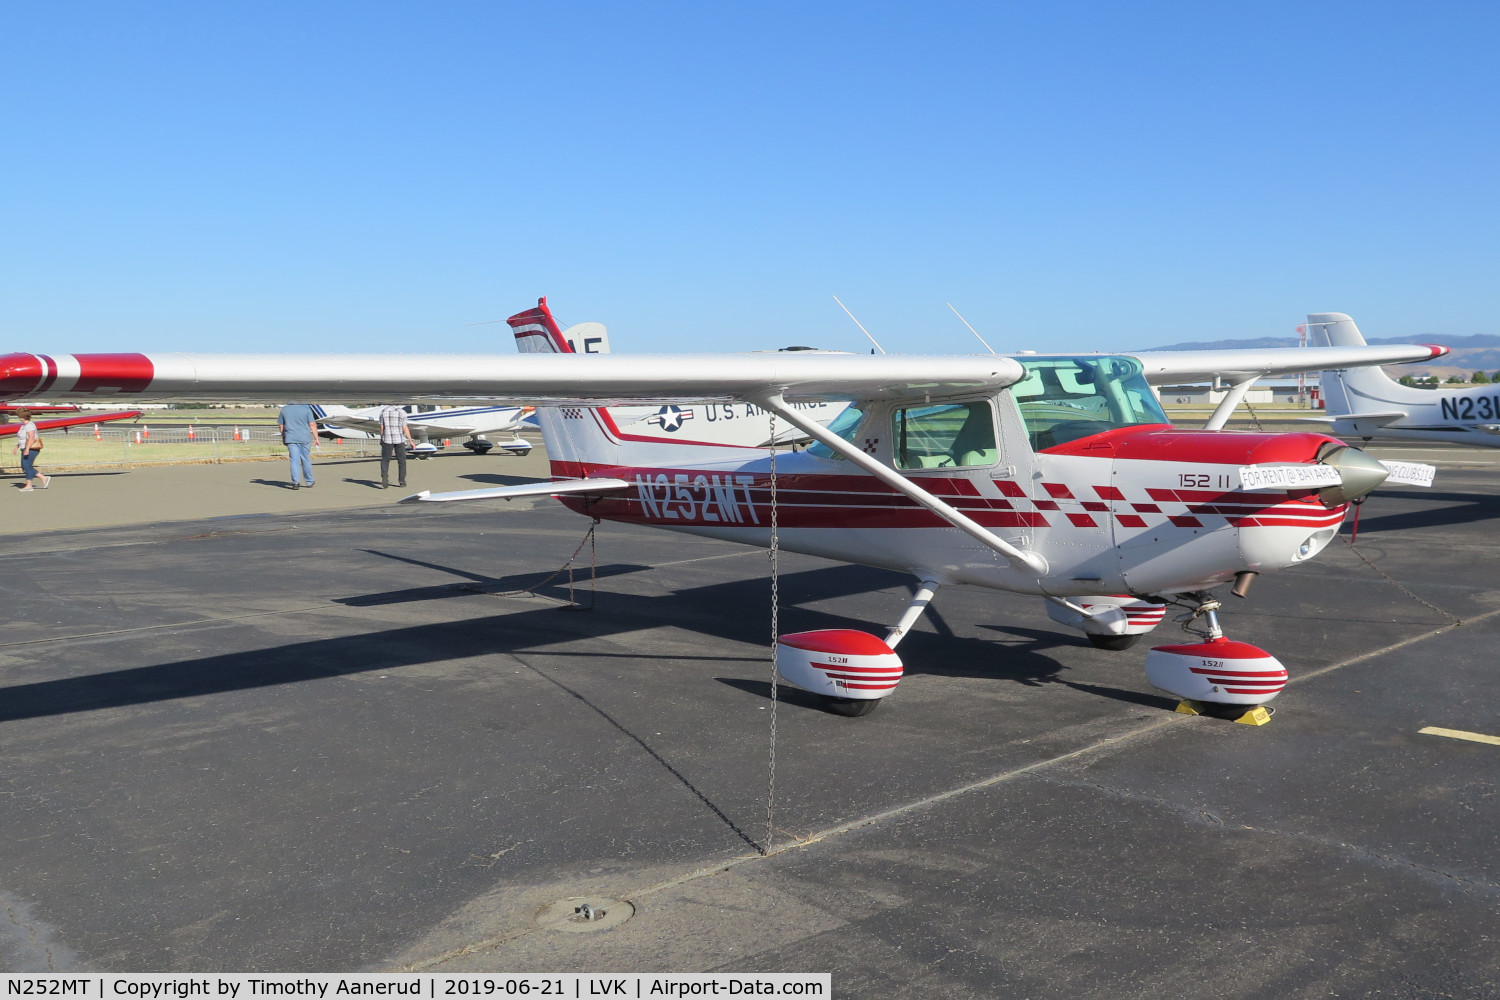 N252MT, 1977 Cessna 152 C/N 15280407, 1977 Cessna 152, c/n: 15280407, ex N24843, 2019 AOPA Livermore Fly-In